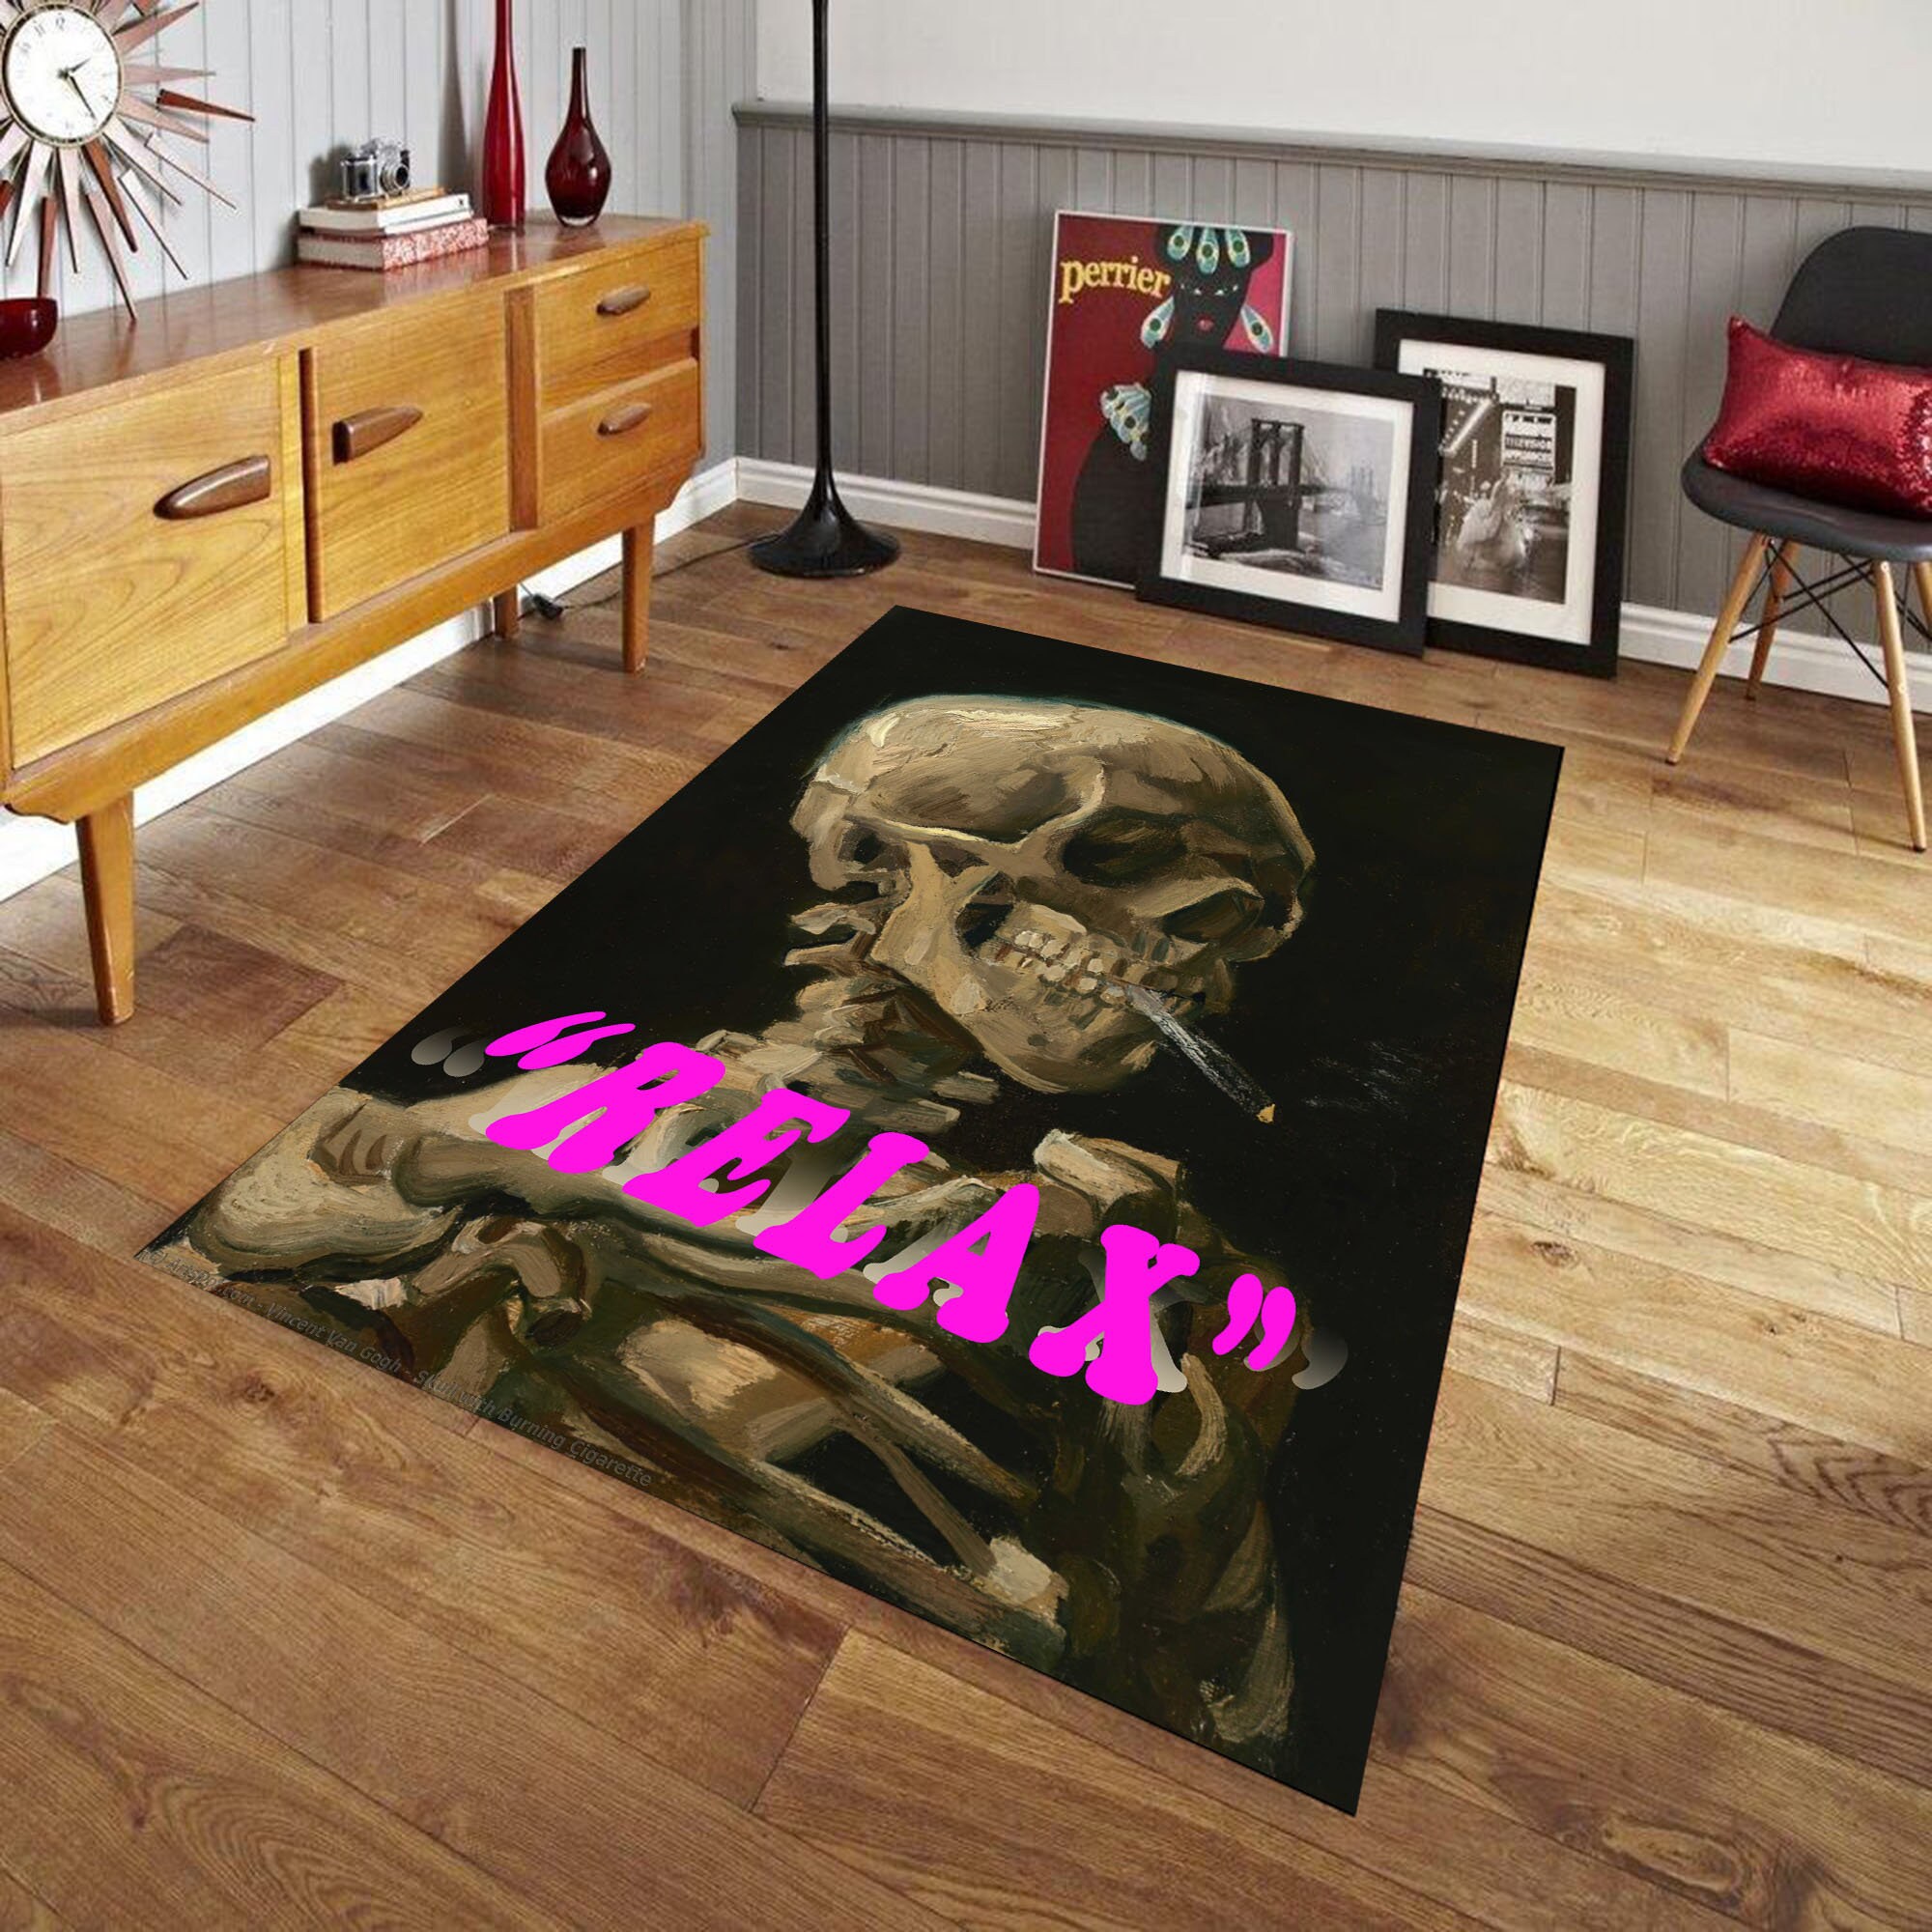 Discover Shady Relax Smoking Skull Rug,Funny Theme Rug,Funny Living Room Rug,Relax Skull Pattern Rug,Funny Kitchen Rug,Funny Pattern Bedroom Rug